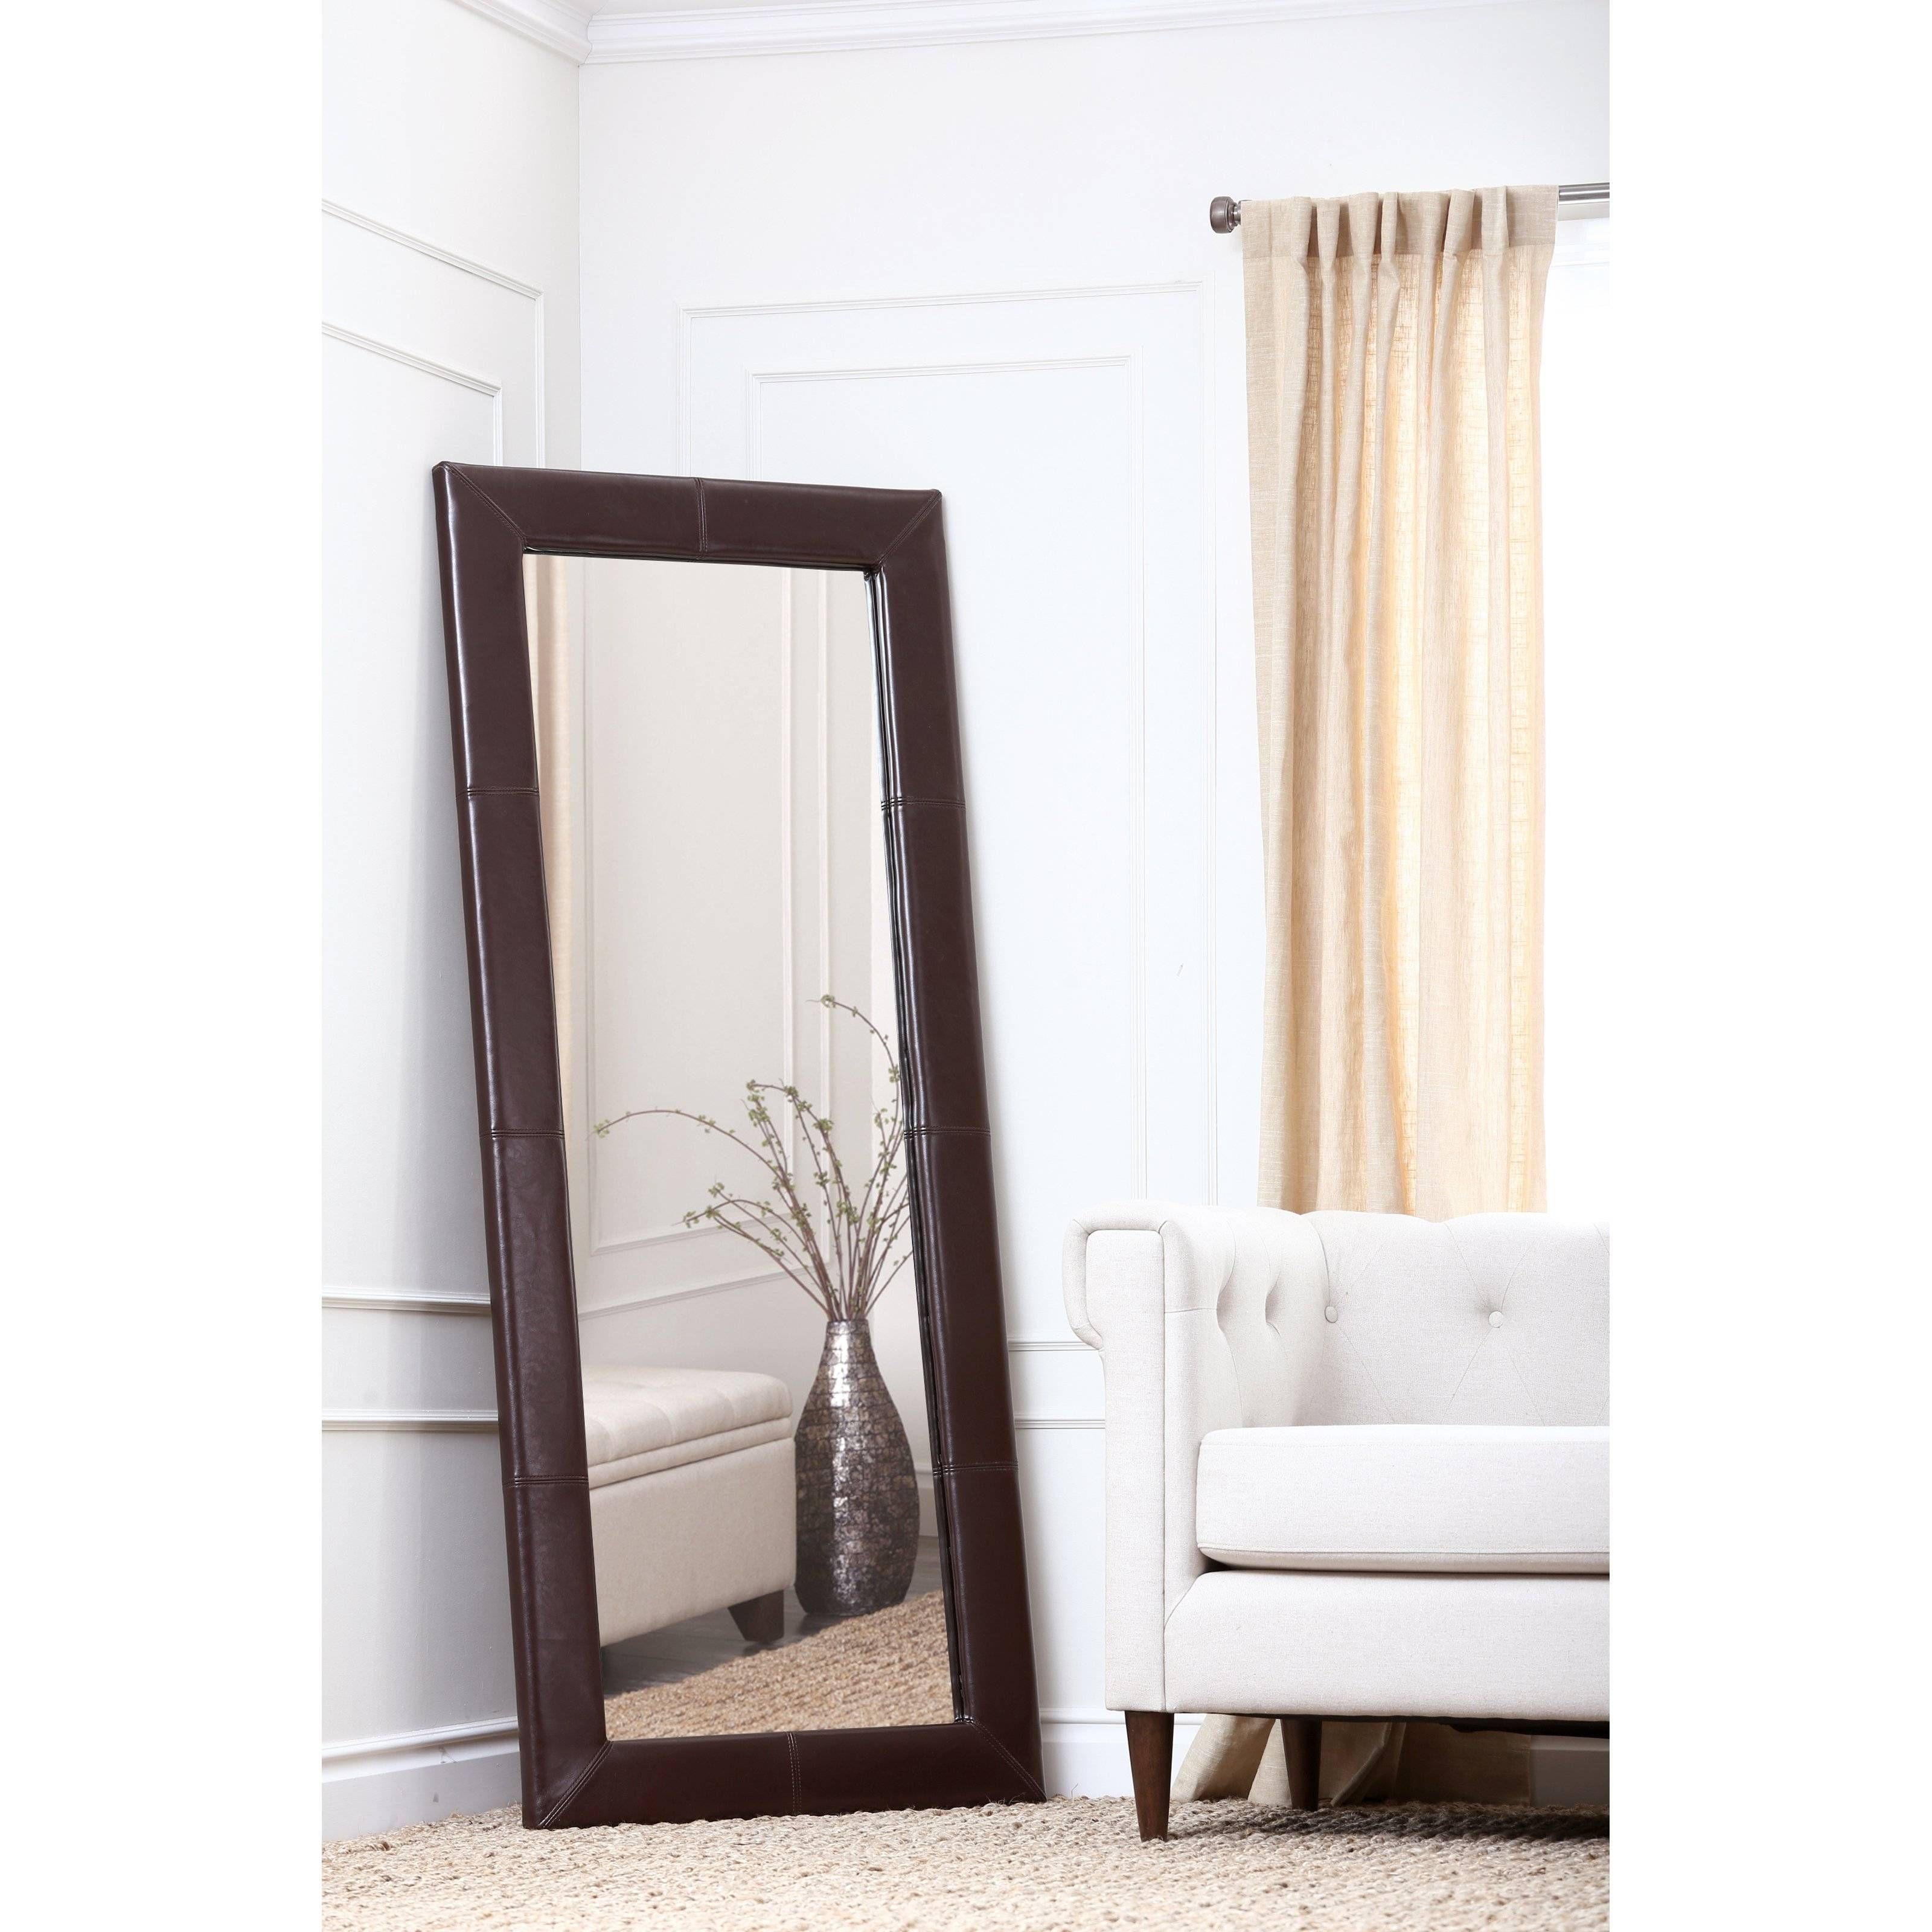 Belham Living Delano Espresso Brown Oversized Full Length Mirror Within Large Brown Mirrors (View 7 of 15)